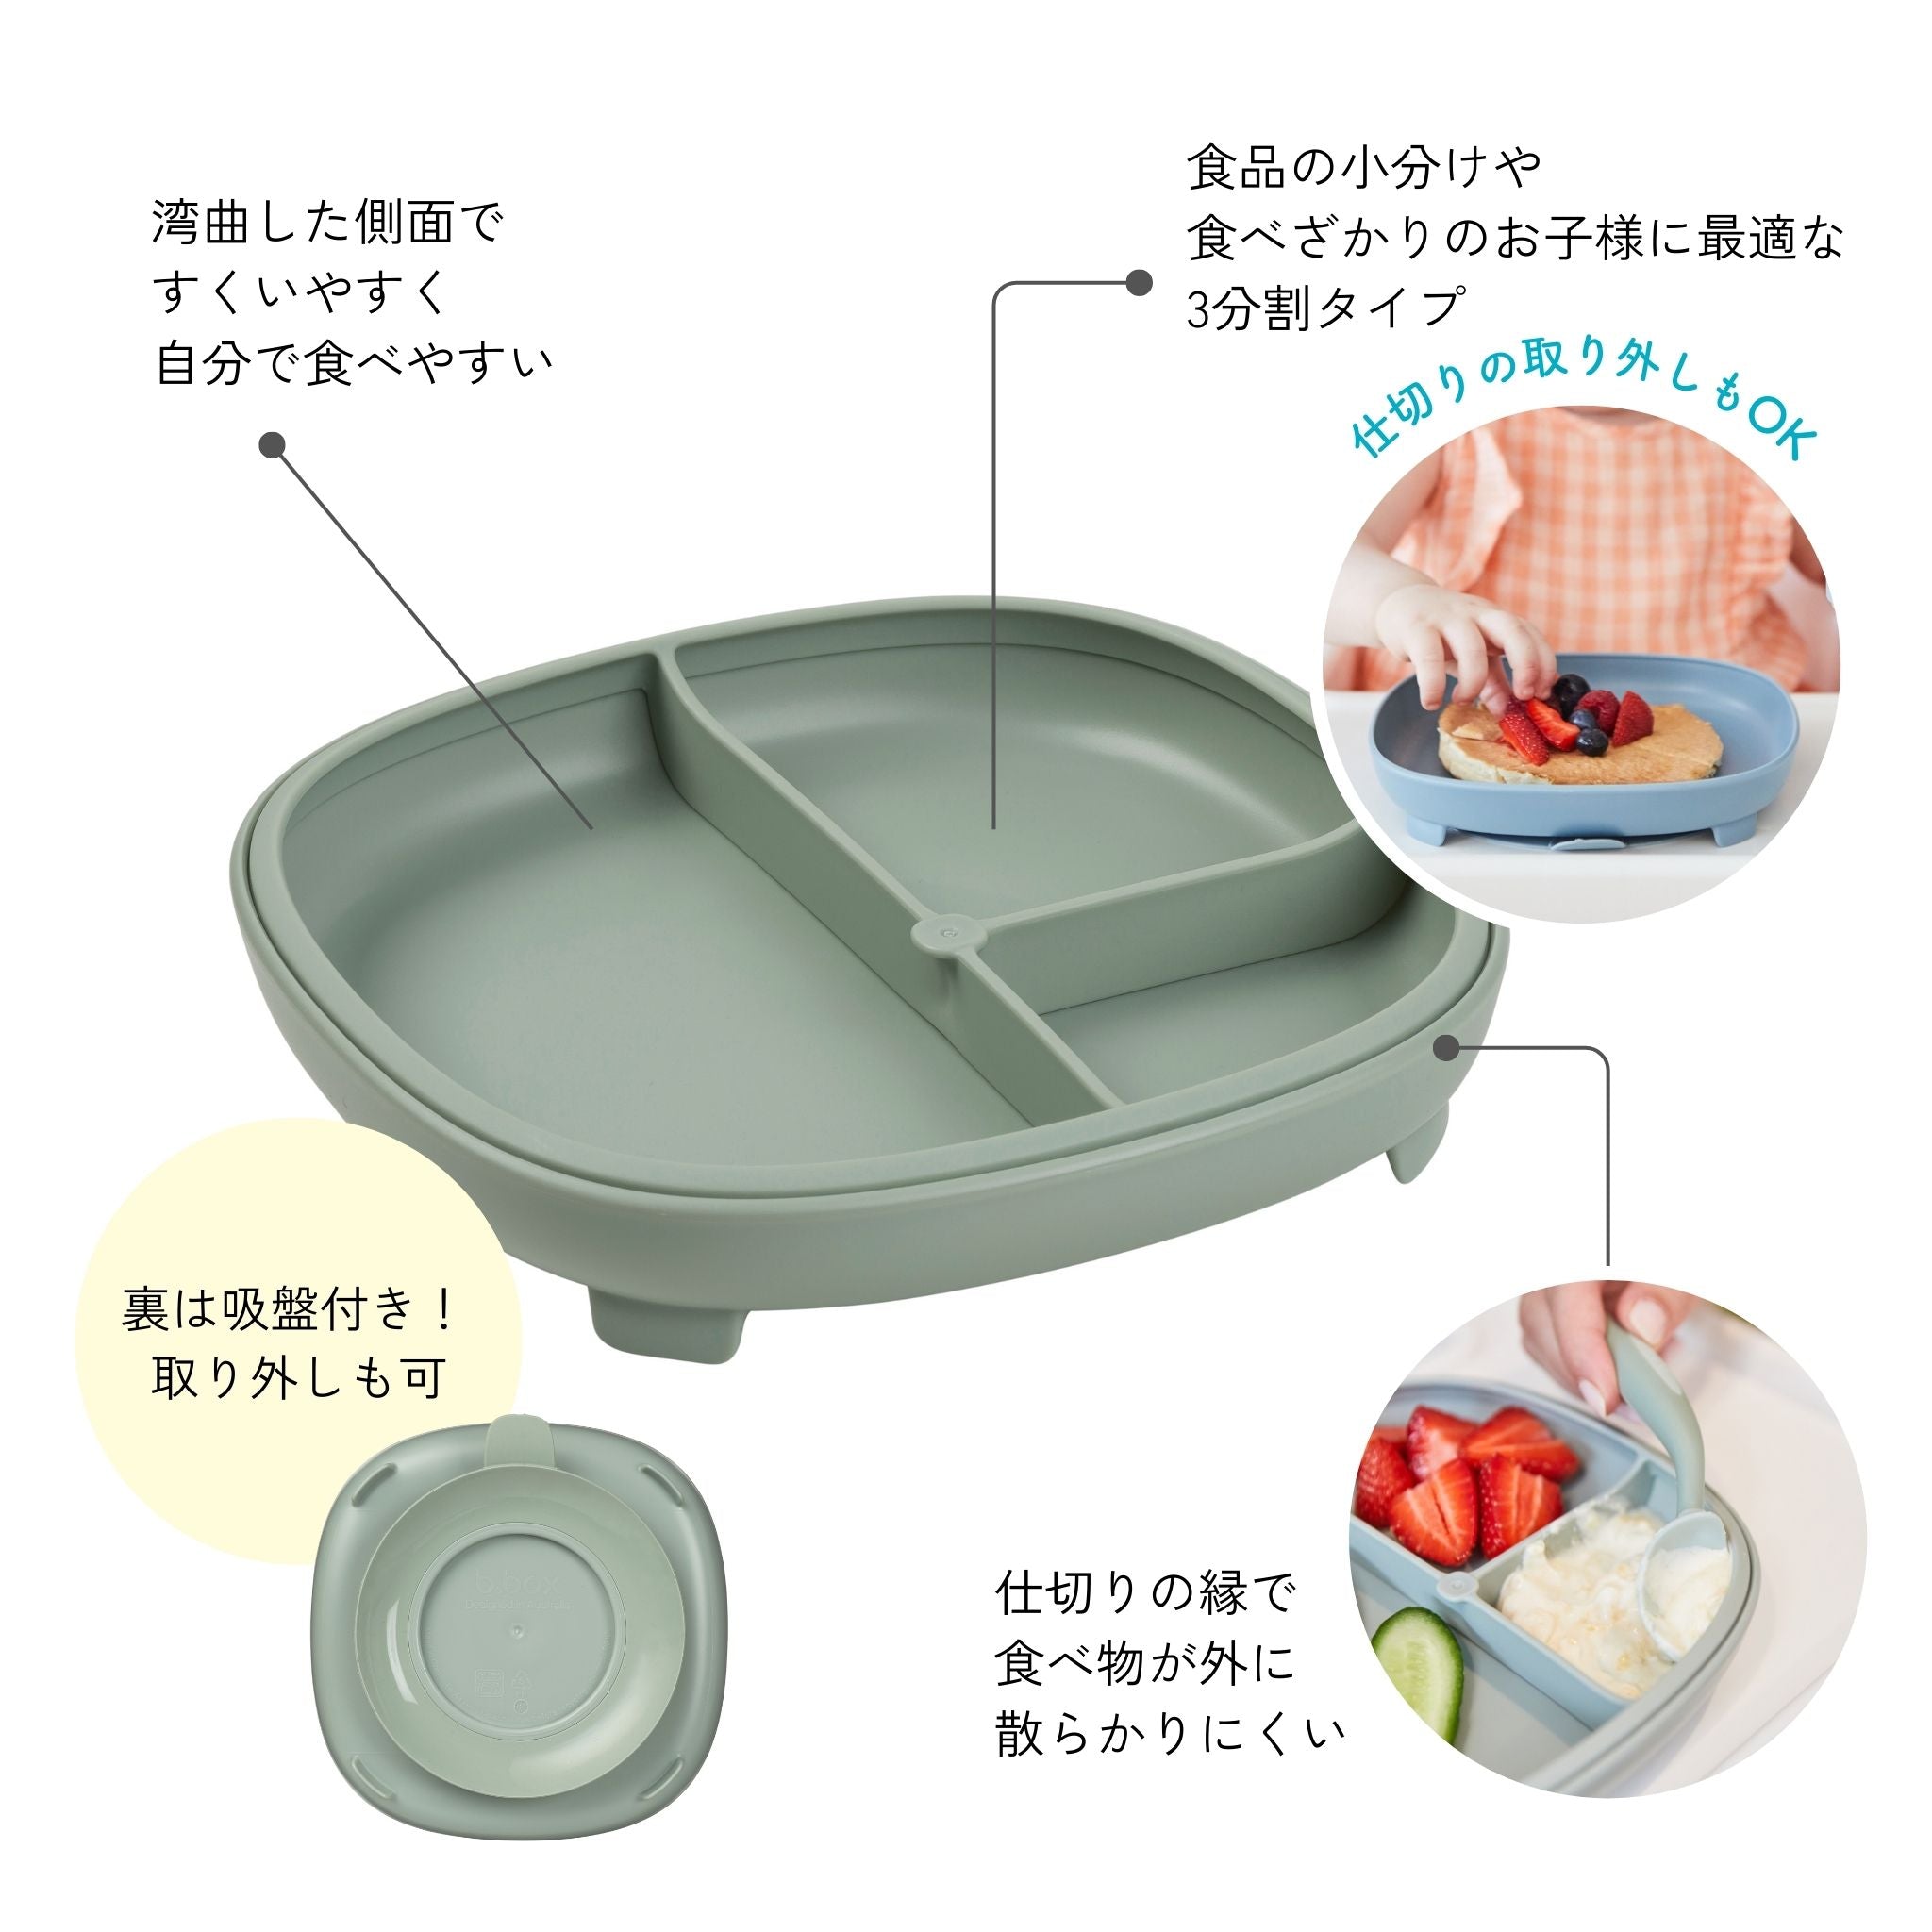 2 in 1 suction plate 説明画像